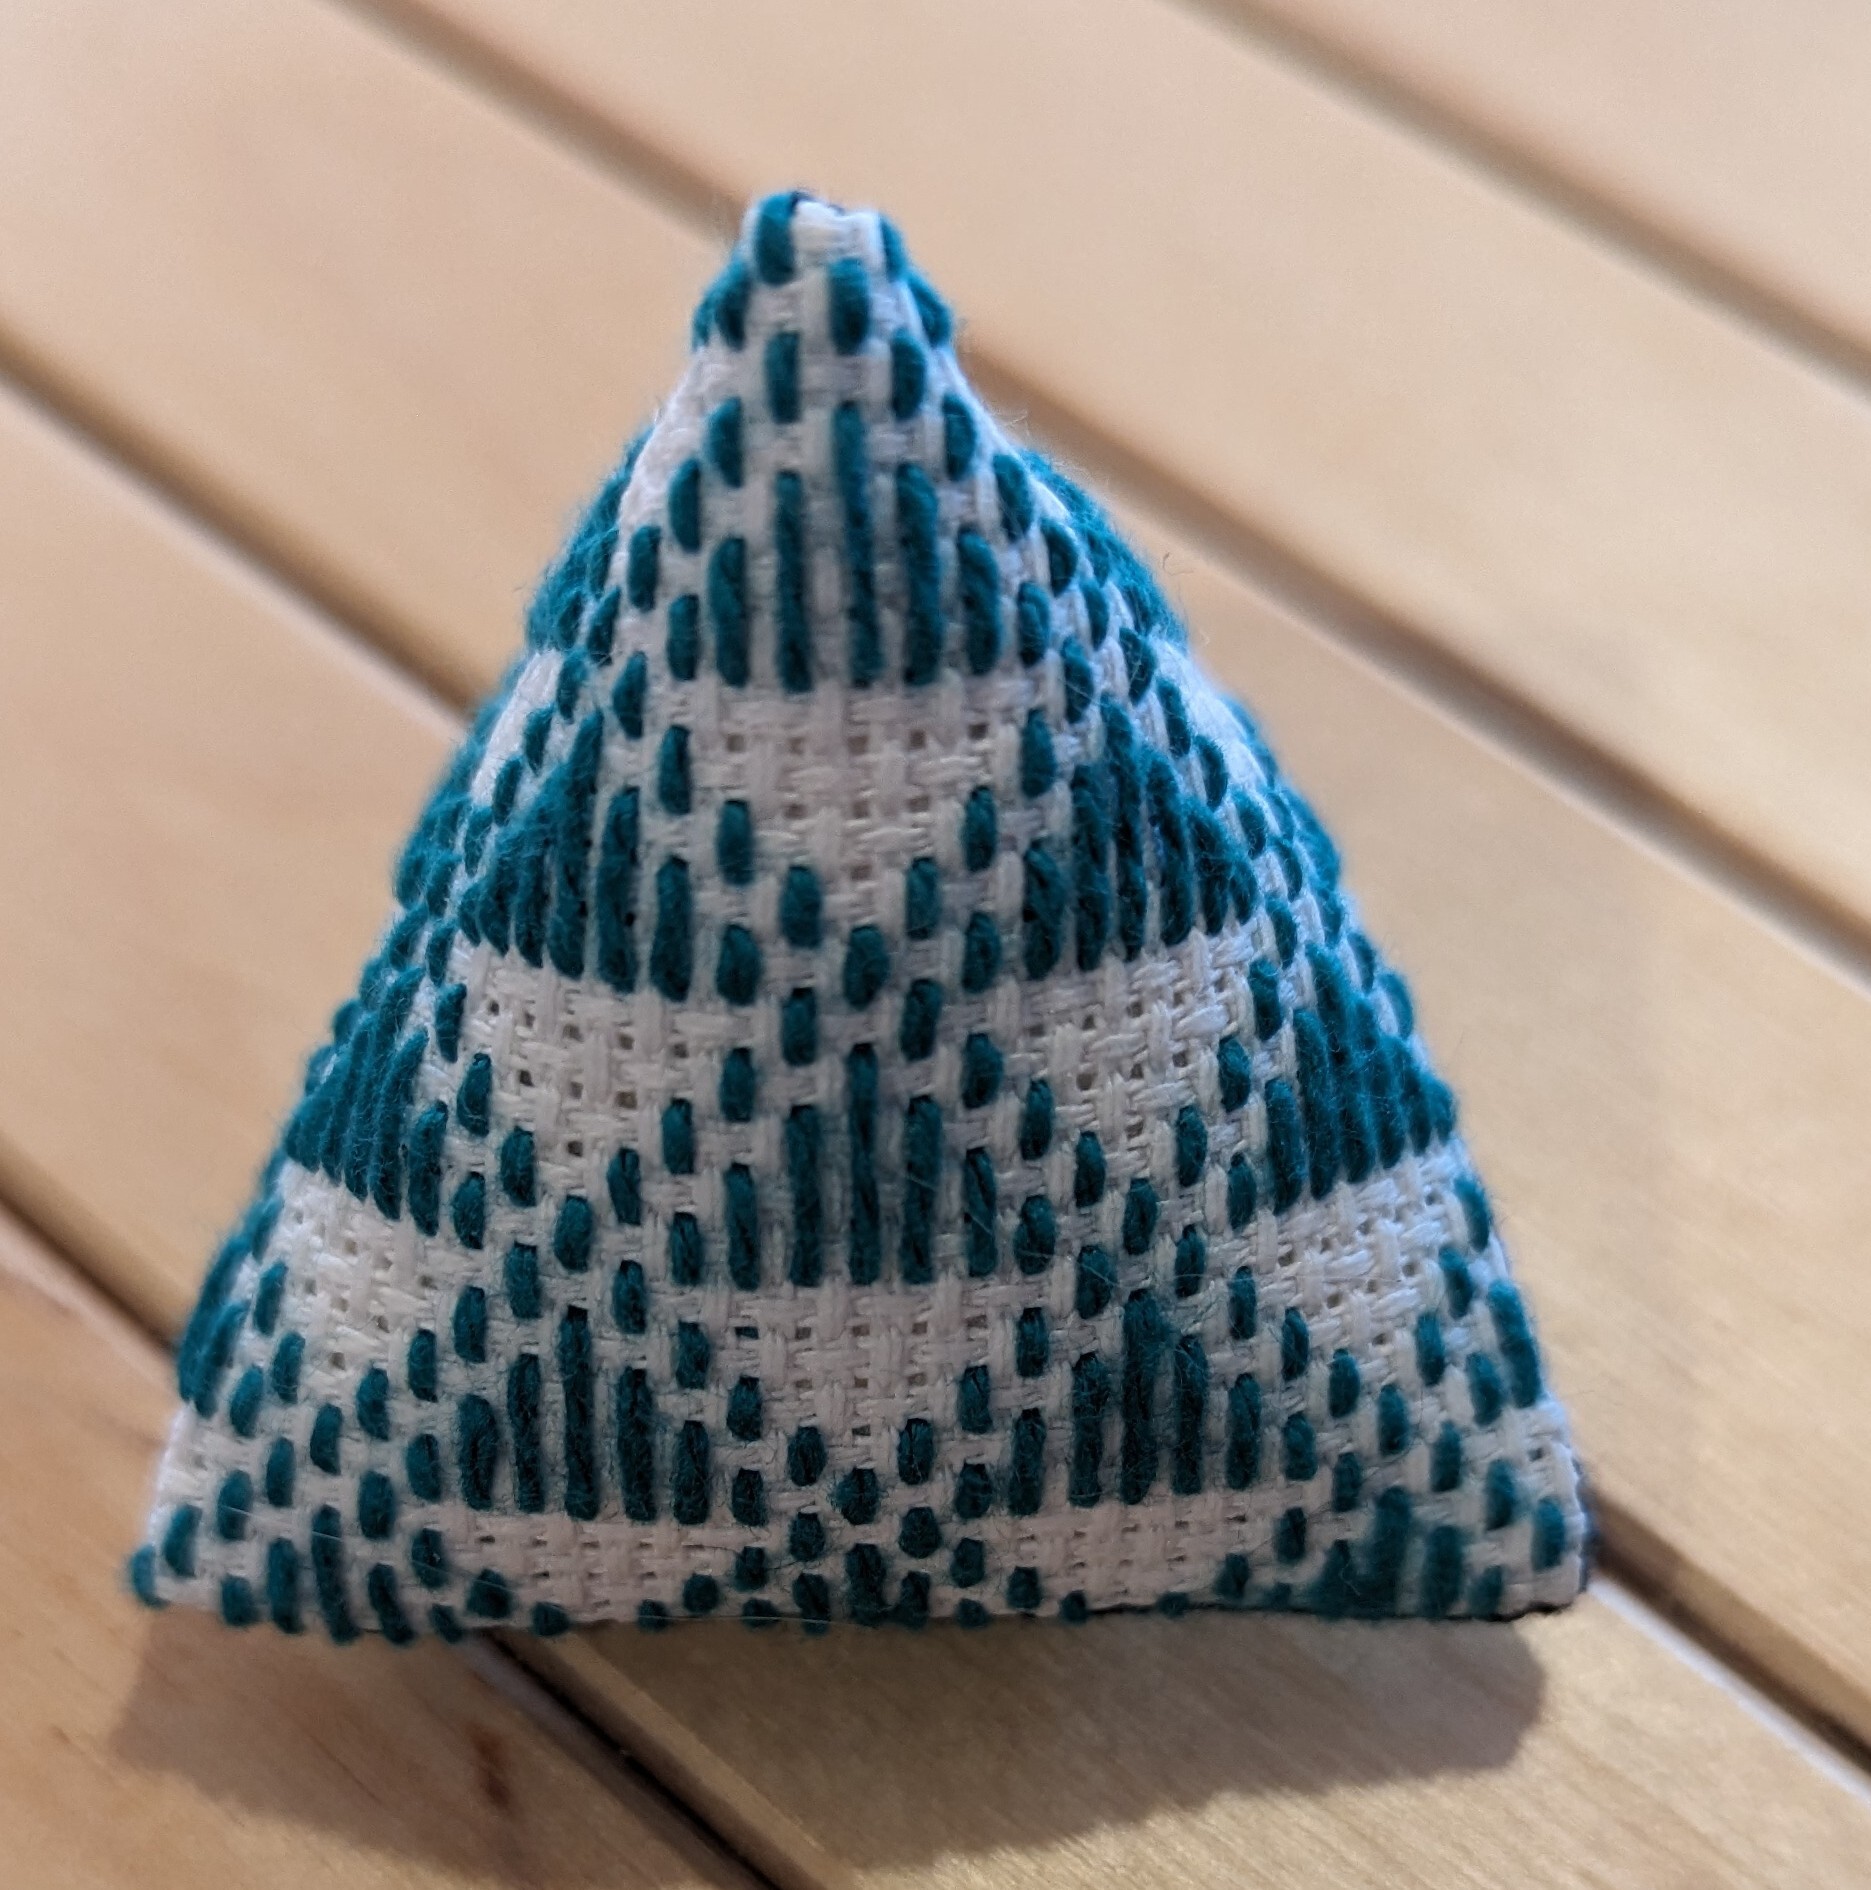 and then you sew it into a little pyramid ahape